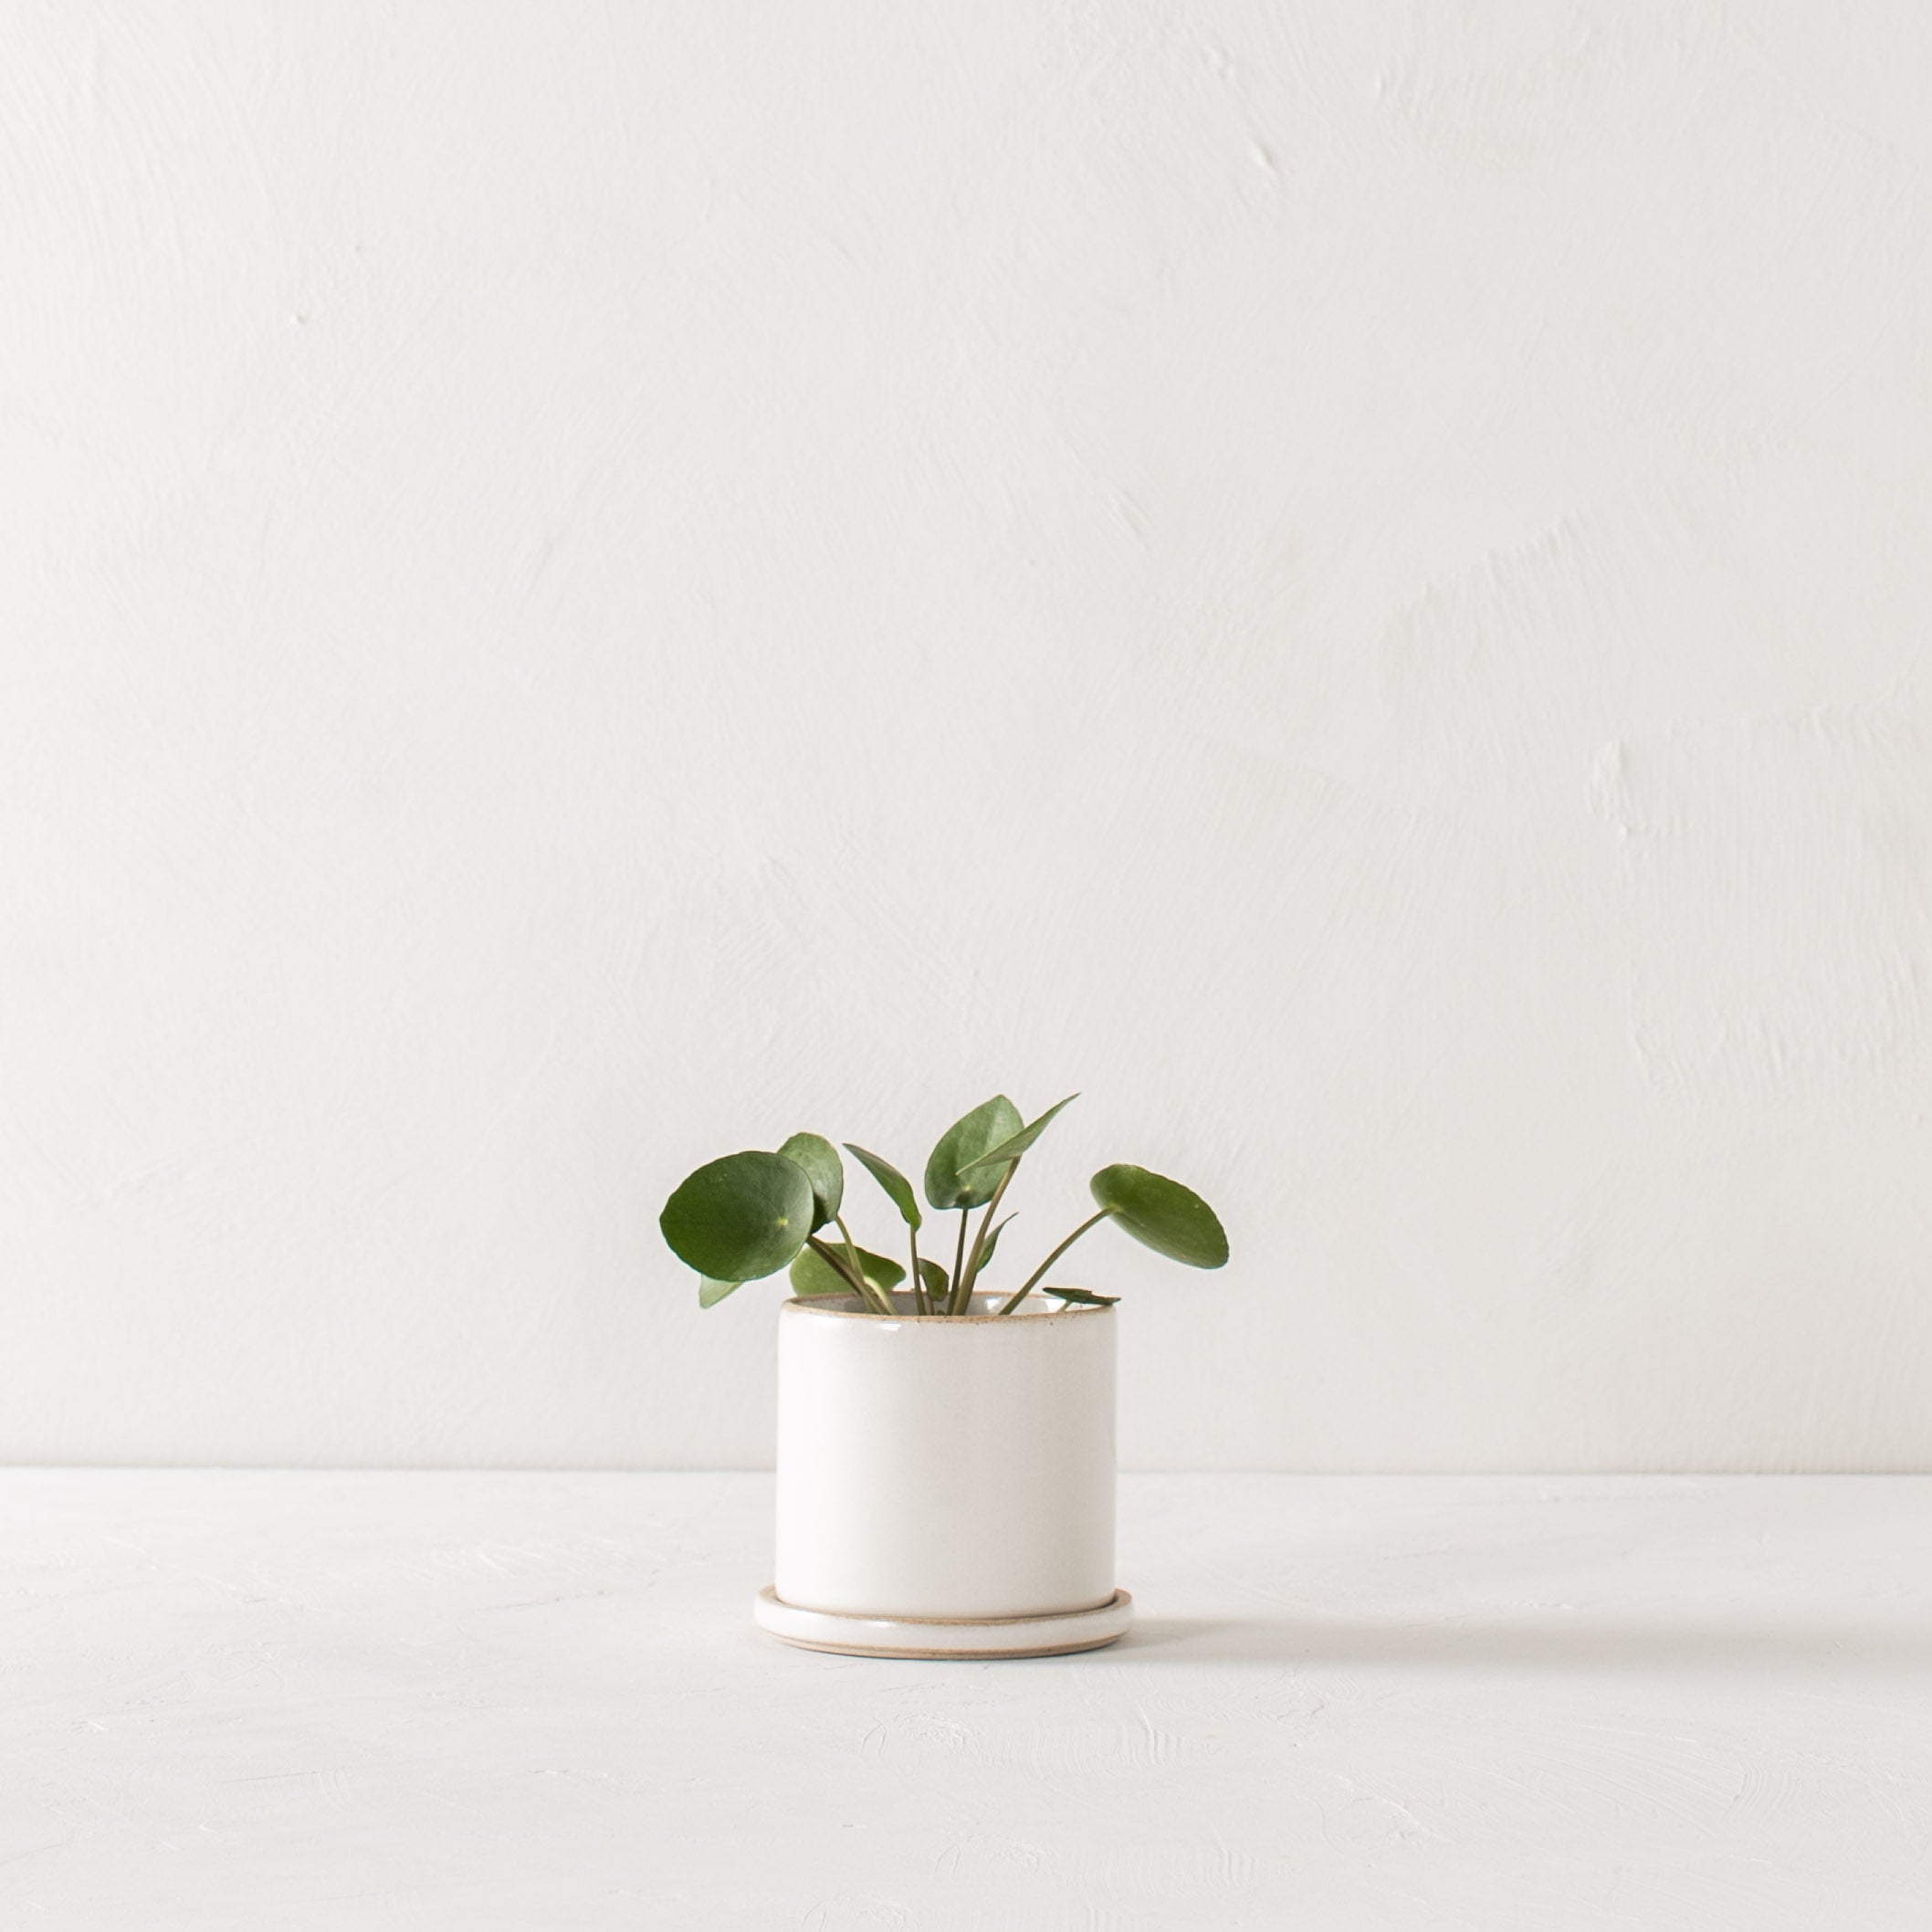 Minimal white 4 inch ceramic planter with bottom drainage dish. Planter houses plant in the center of image on white textured tabletop and white textured backdrop. Handmade ceramic planter, designed by Convivial Production, sold by Shop Verdant  Kansas City, Mo plant store.